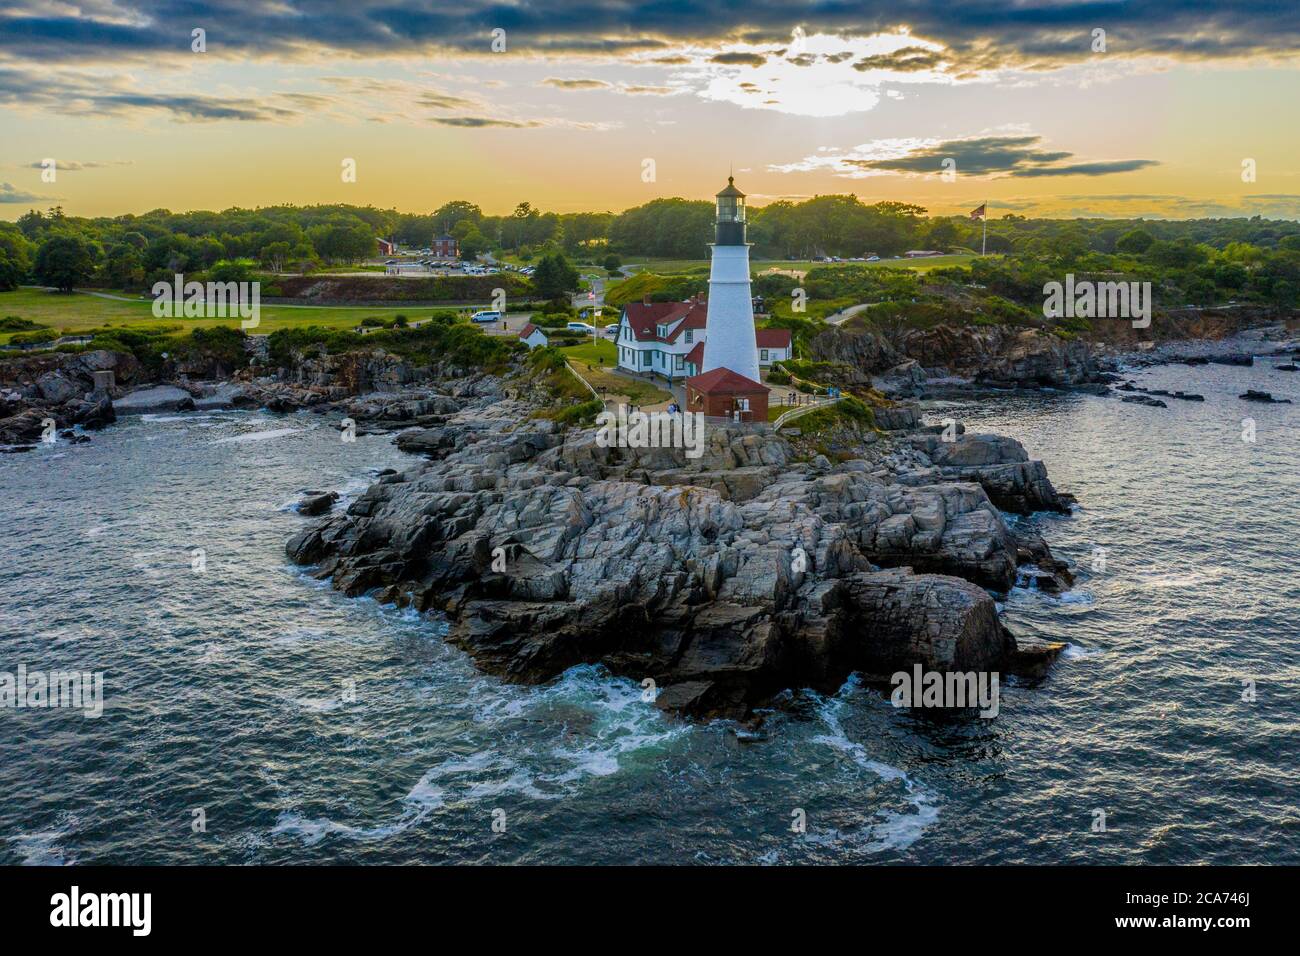 Aerial view of Portland Head Lighthouse at sunset in Fort Williams Park, Cape Elizabeth, Maine, located at the entrance into Portland Harbor. Stock Photo